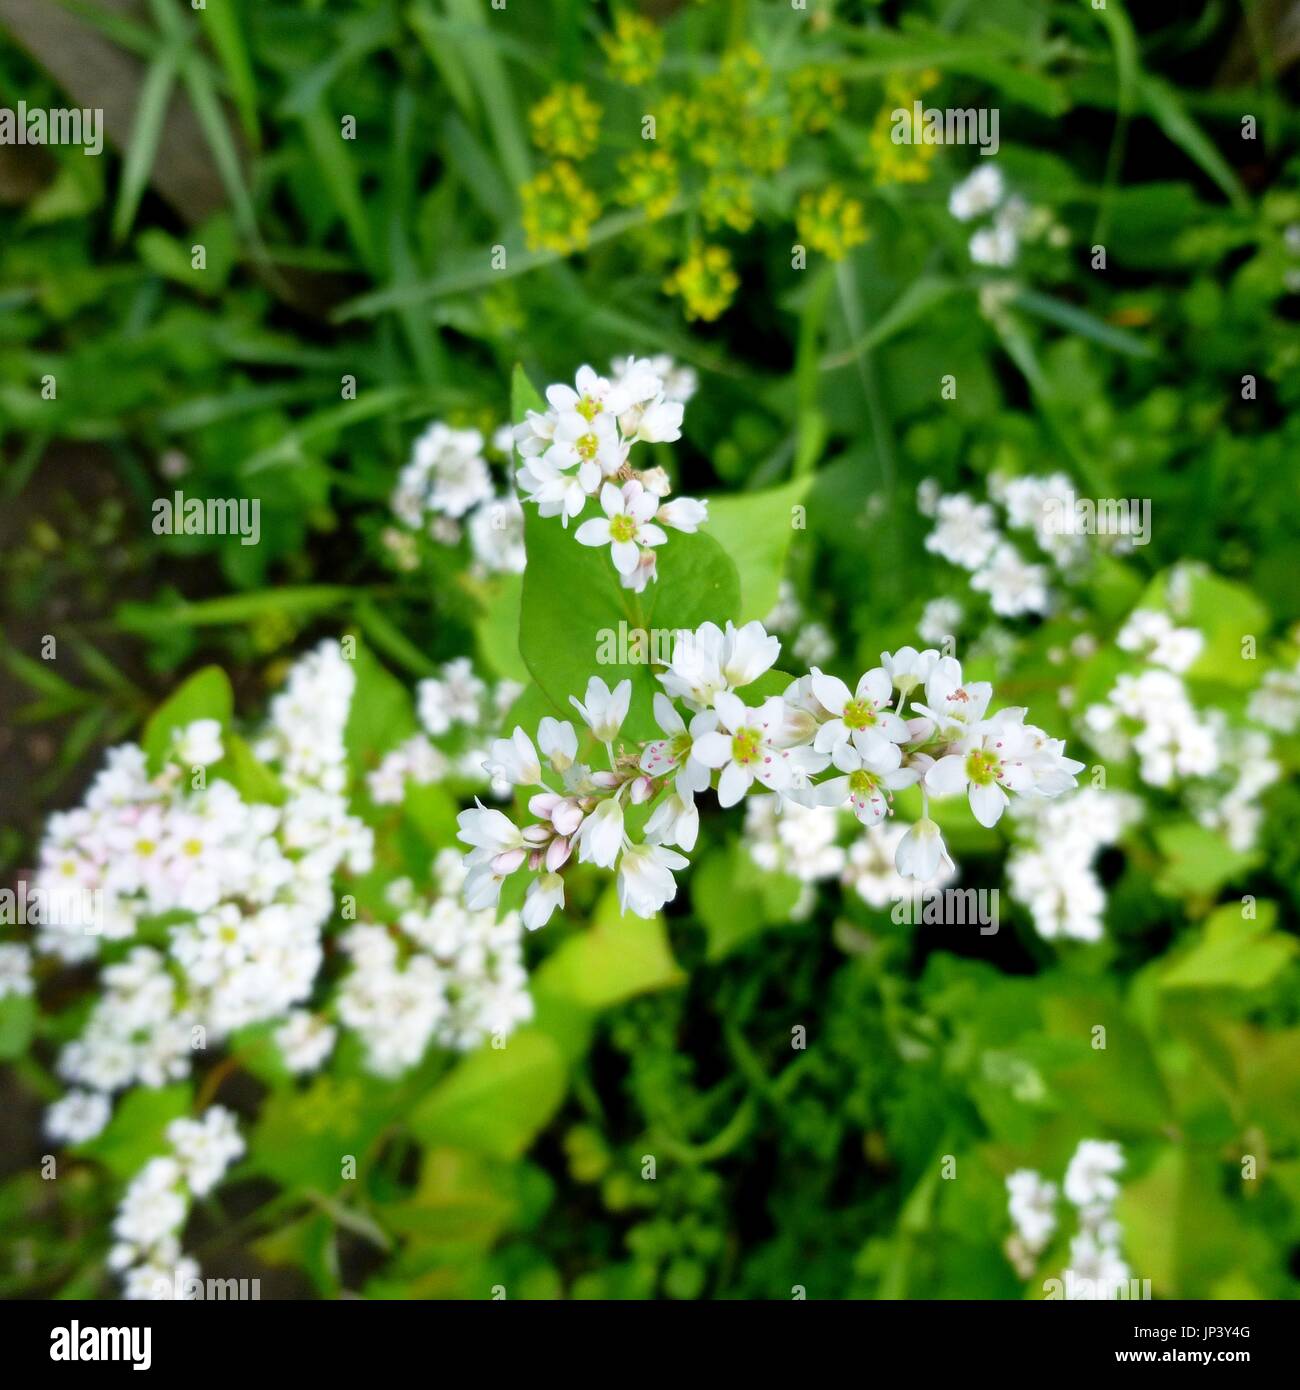 Buckwheat blossom. Macro photo of flower buckwheat with selective focus. Natural background. Vegetable garden plants. Natural products. Stock Photo